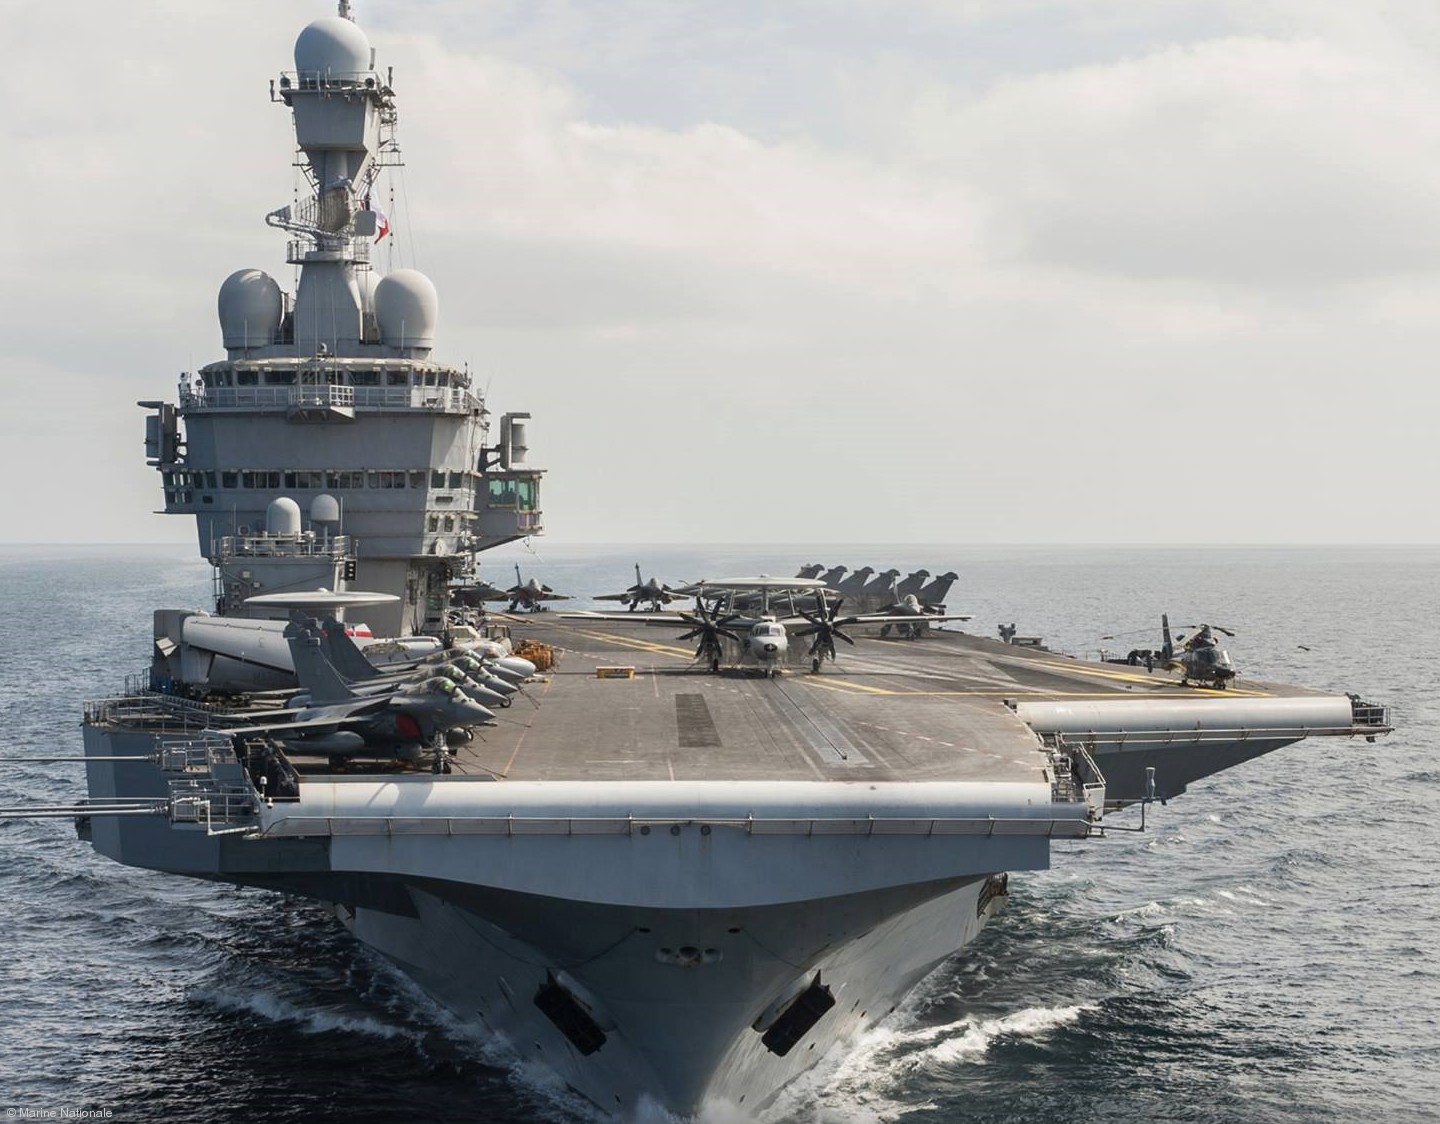  r-91 fs charles de gaulle aircraft carrier french navy 19